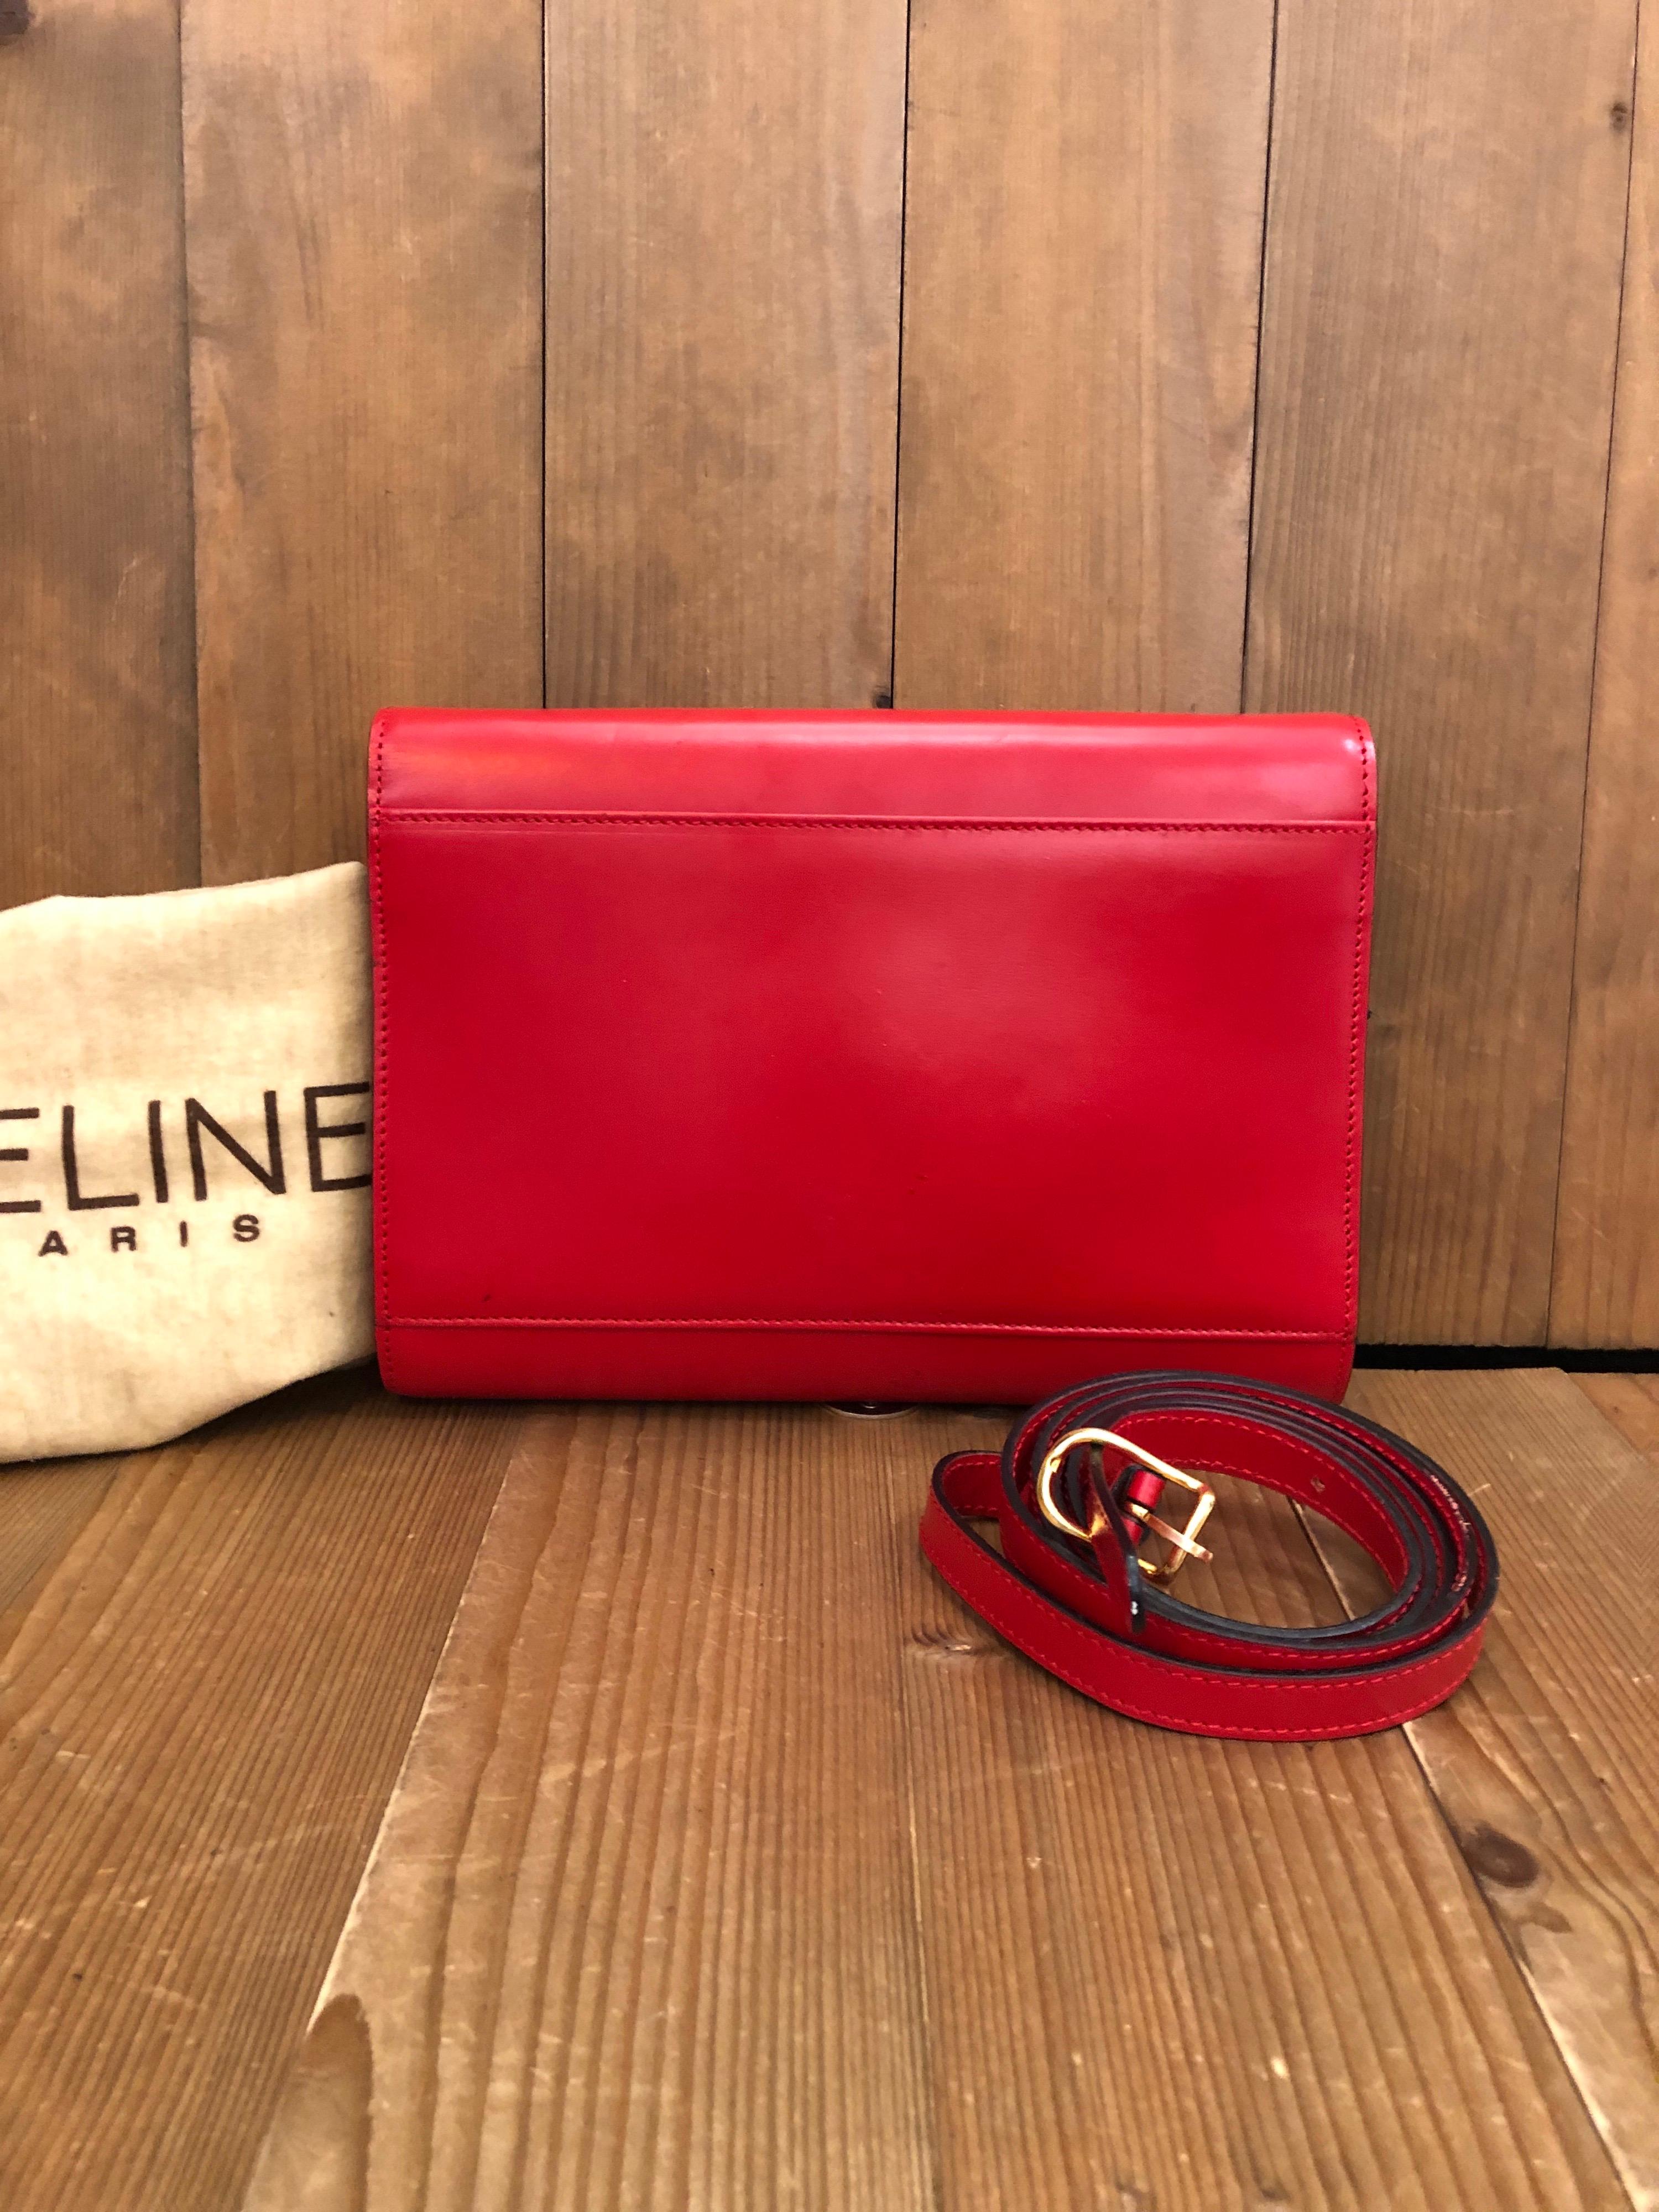 1990s Celine Two-Way Ring Bag in red leather featuring one exterior open pocket and one interior zip pocket. It can be worn as shoulder/crossbody bag or carried as a clutch. Made in Italy. Measures 9.75 x 7 x 1.5 inches. Comes with dust bag and